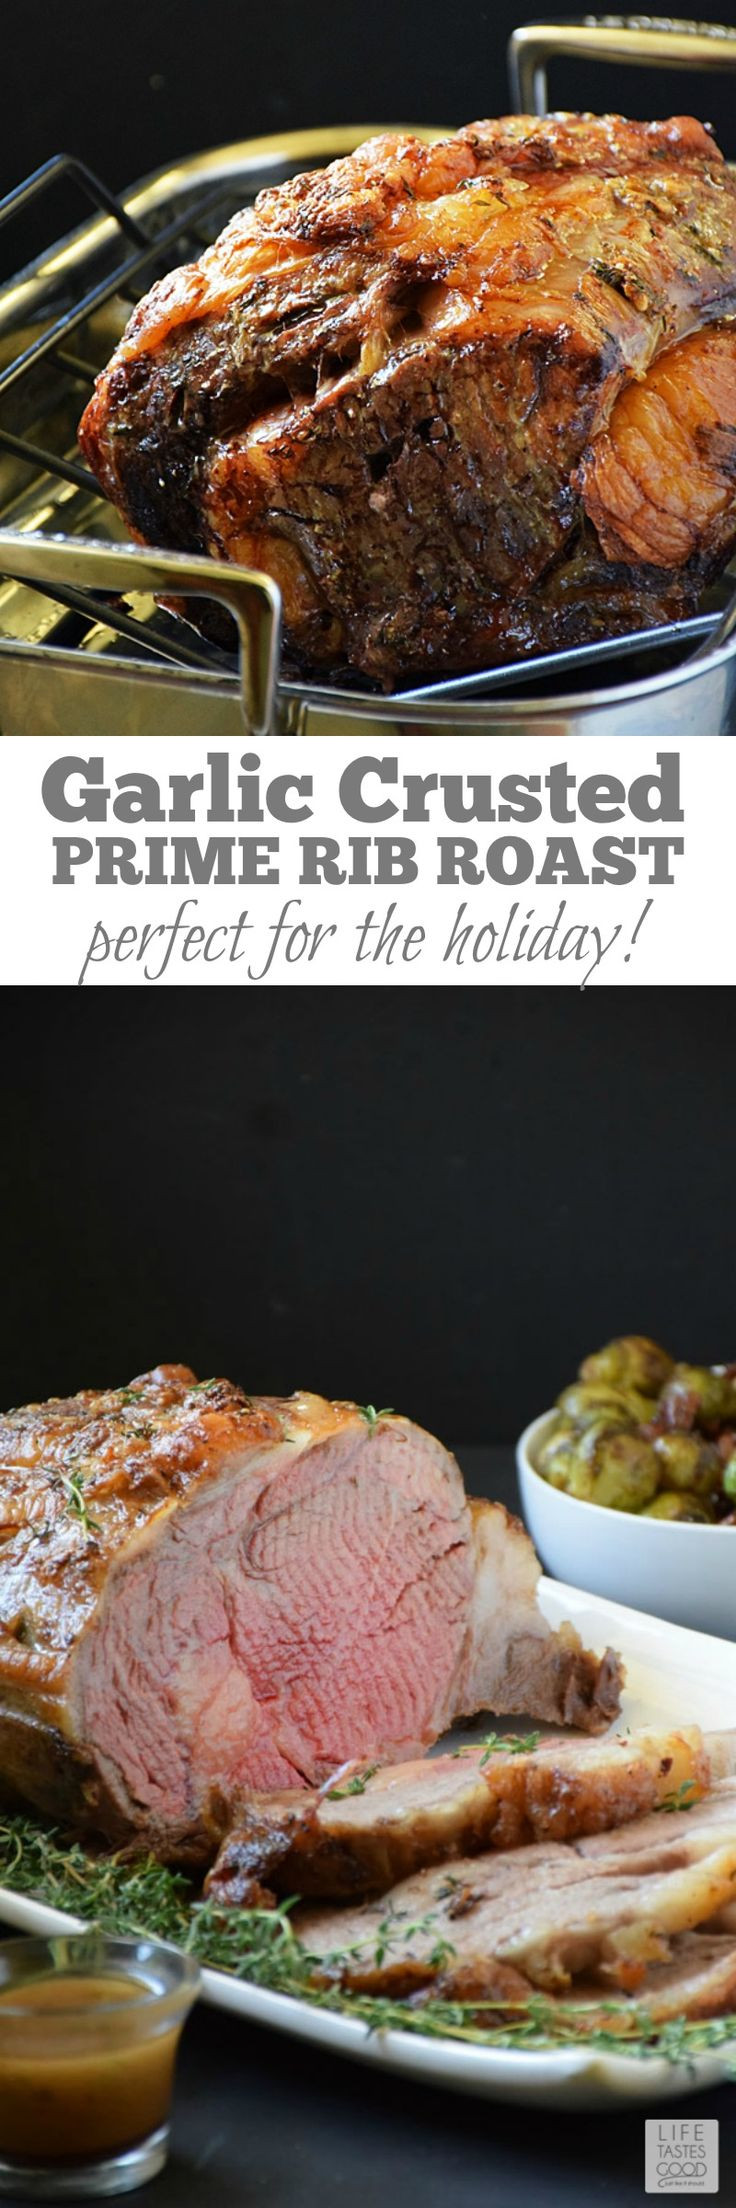 21 Ideas for Sides for Prime Rib Christmas Dinner – Best Diet and ...